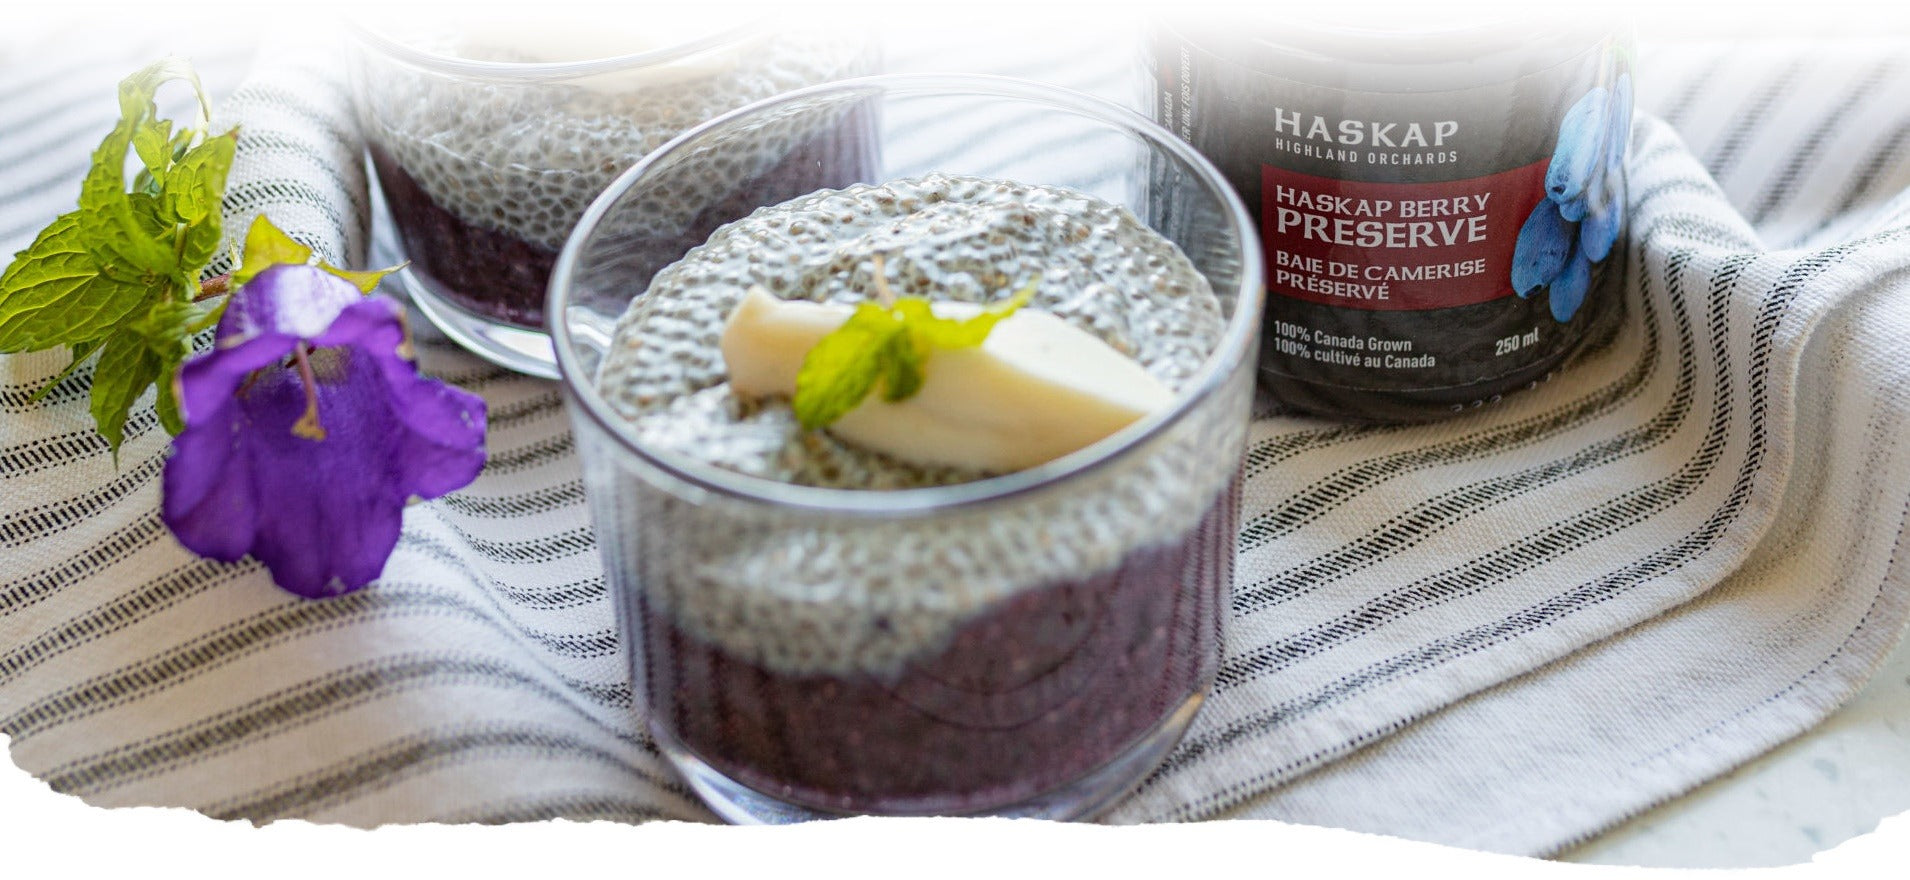 Tablecloth with Haskap berry chia pudding and Haskap berry preserve from Haskap Highland Orchards